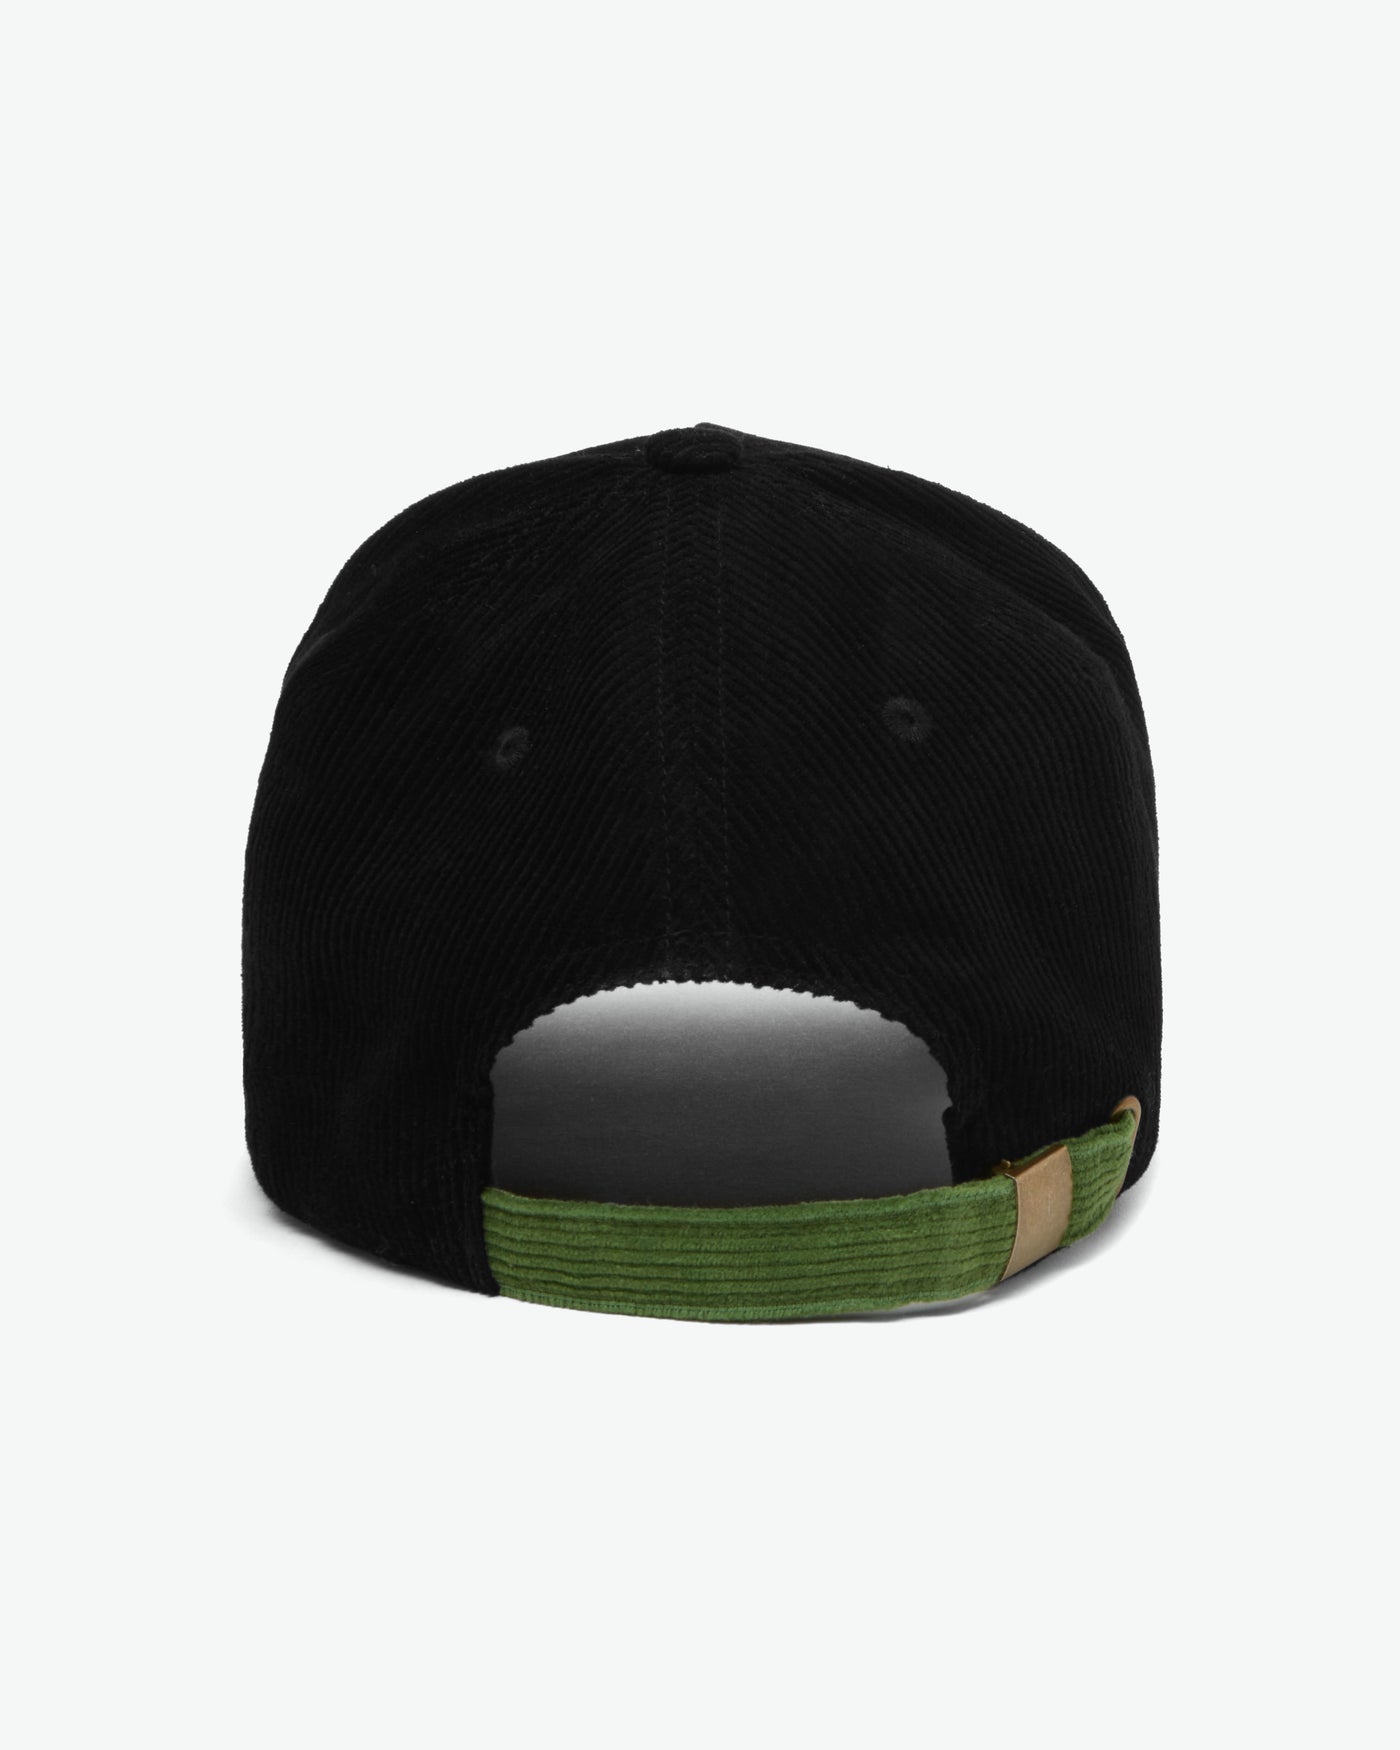 Imperfect Cell Corduroy Hat / Black / Green